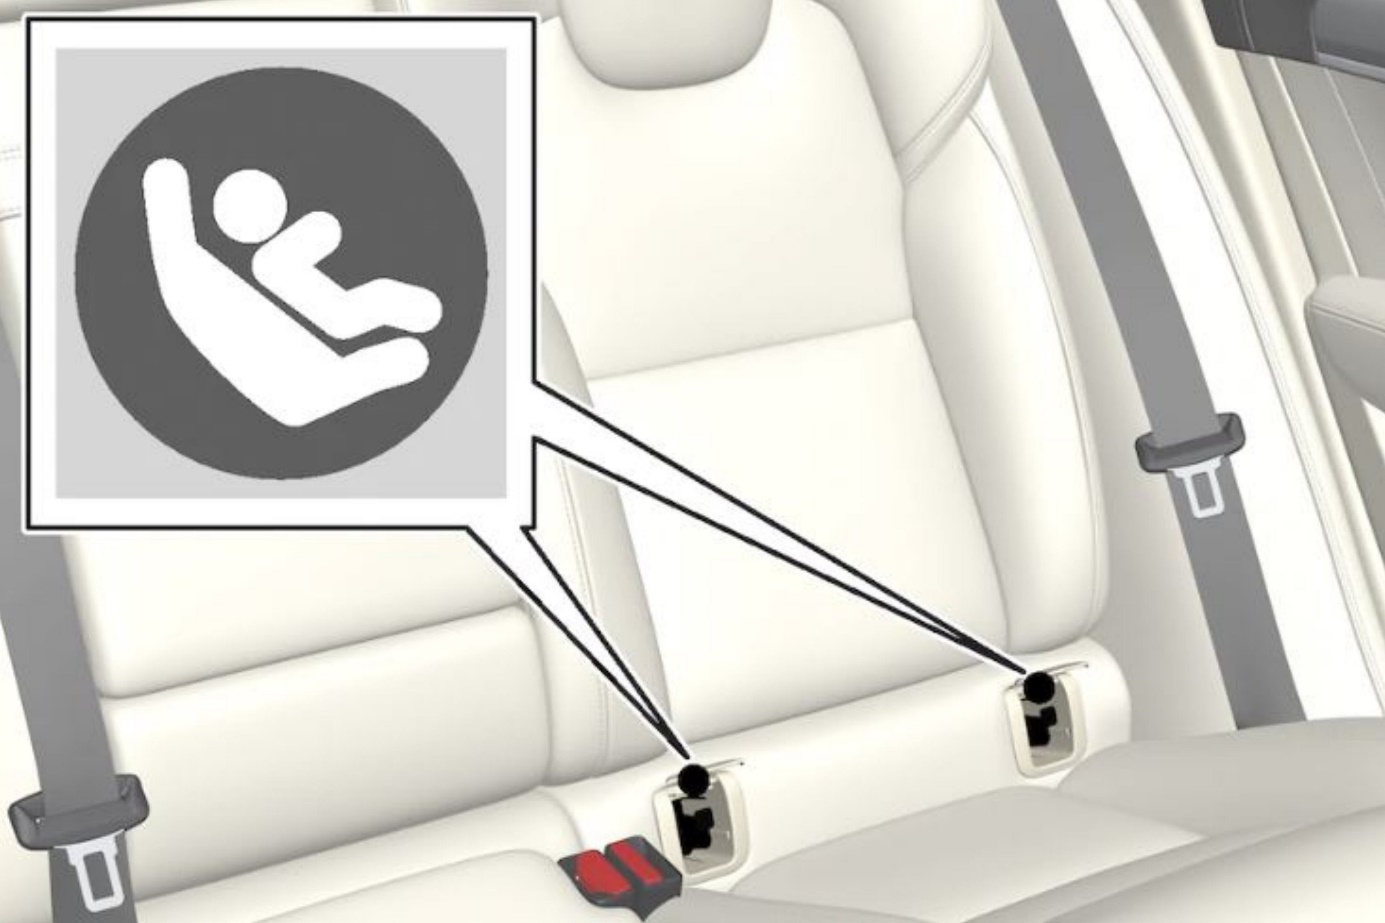 Lower Anchors & Seat Belts - Safer Together? – Buckle Me Baby Coats